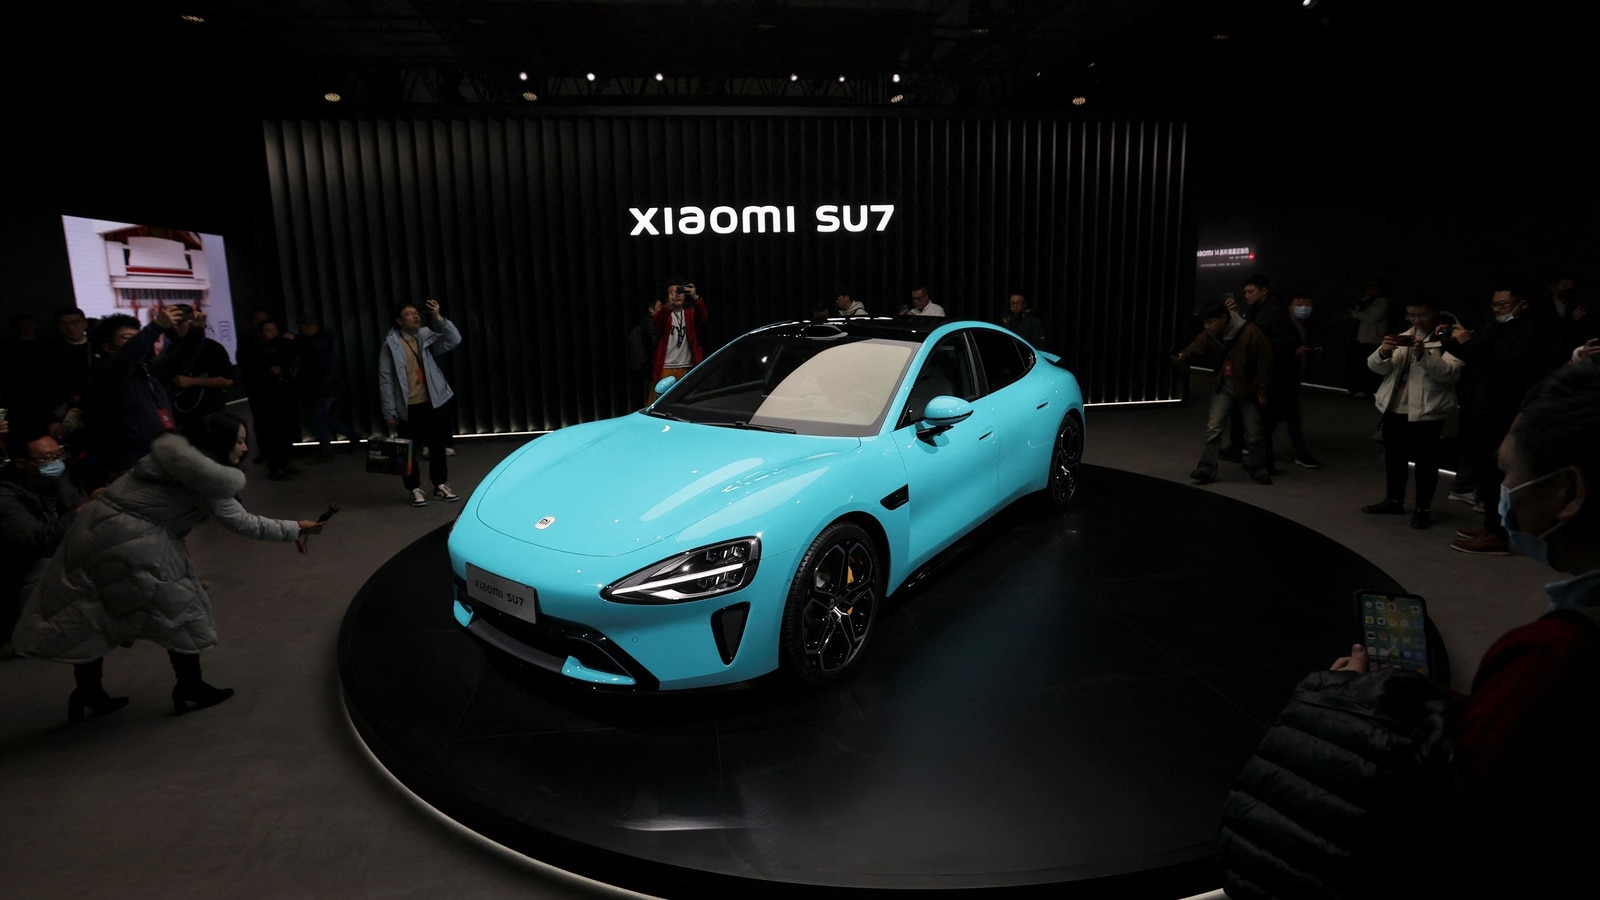 Xiaomi Unveils Its First EV, the SU7, With Ambition to Be China’s Porsche or Tesla